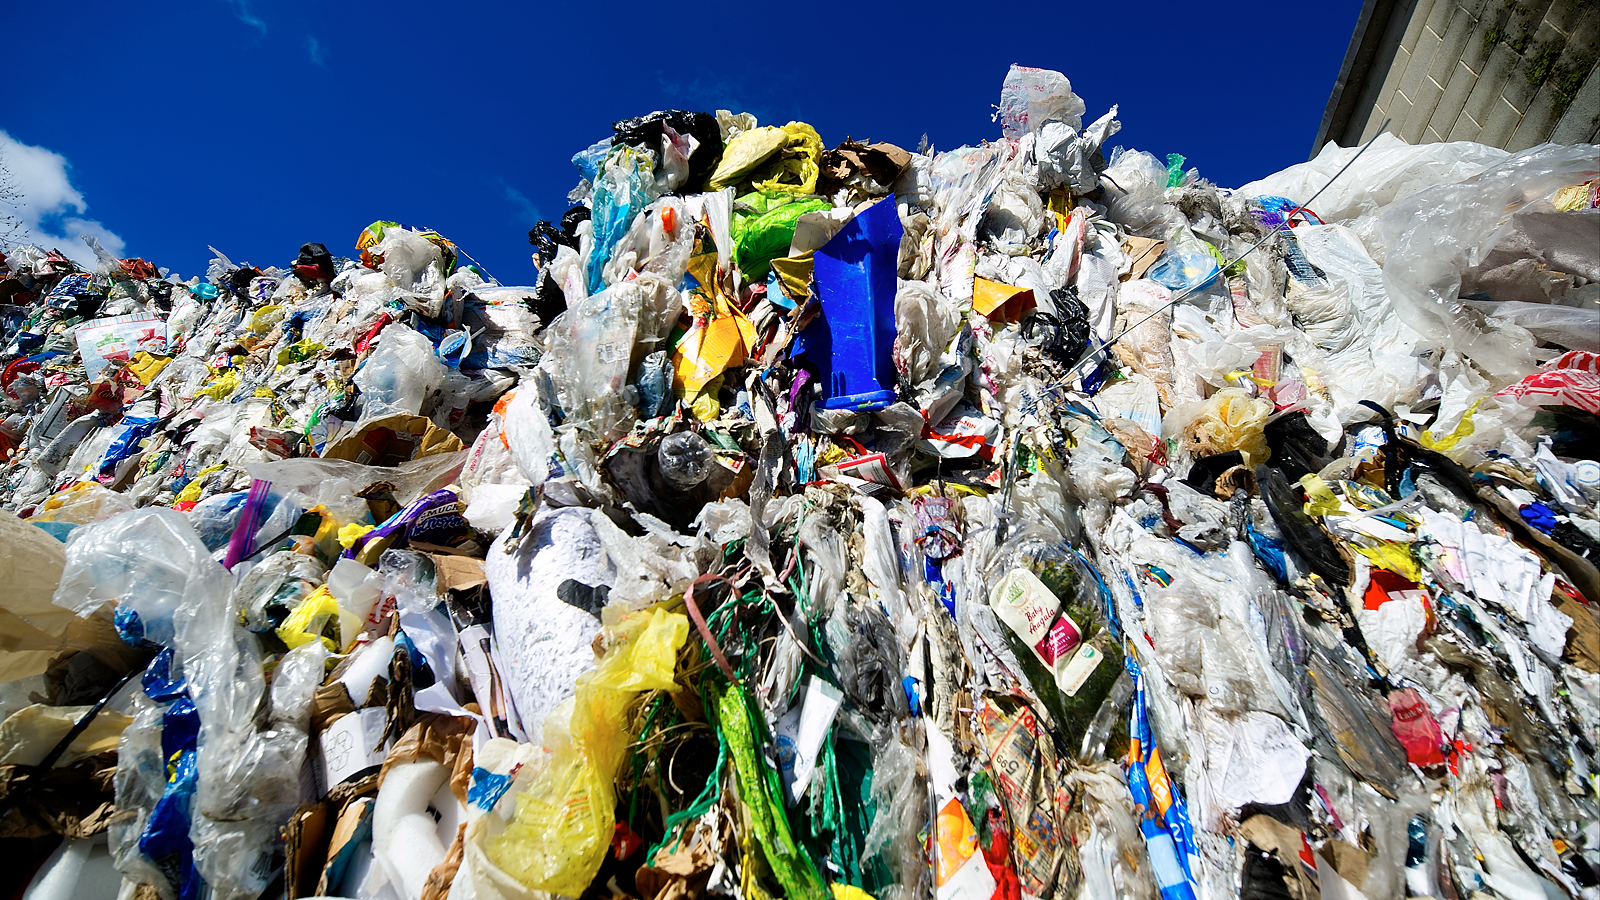 Materials that cannot be recycled are sorted out for disposal. (Bastiaan Slabbers for NewsWorks)